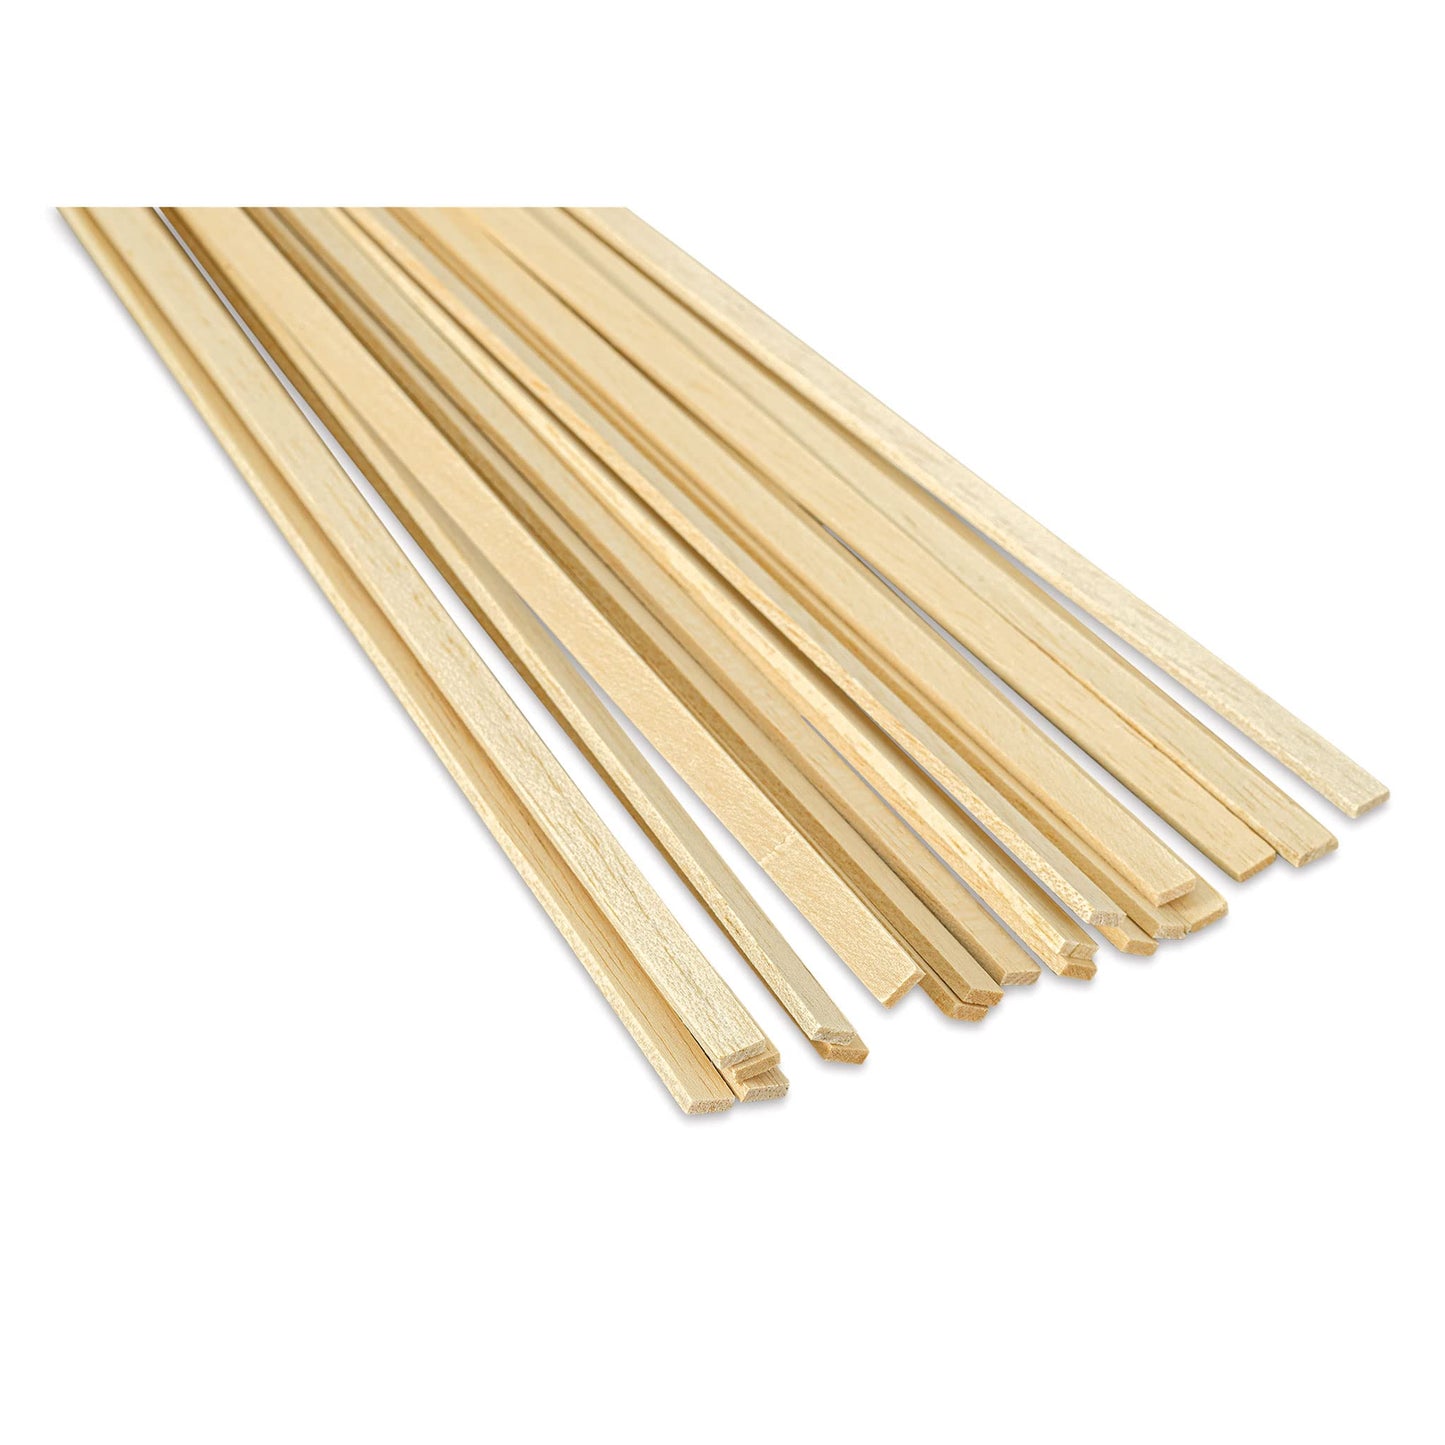 Balsa Wood 1/8 X 1/8 X 36in (18) - Quantity is Listed in Parenthesis in Title